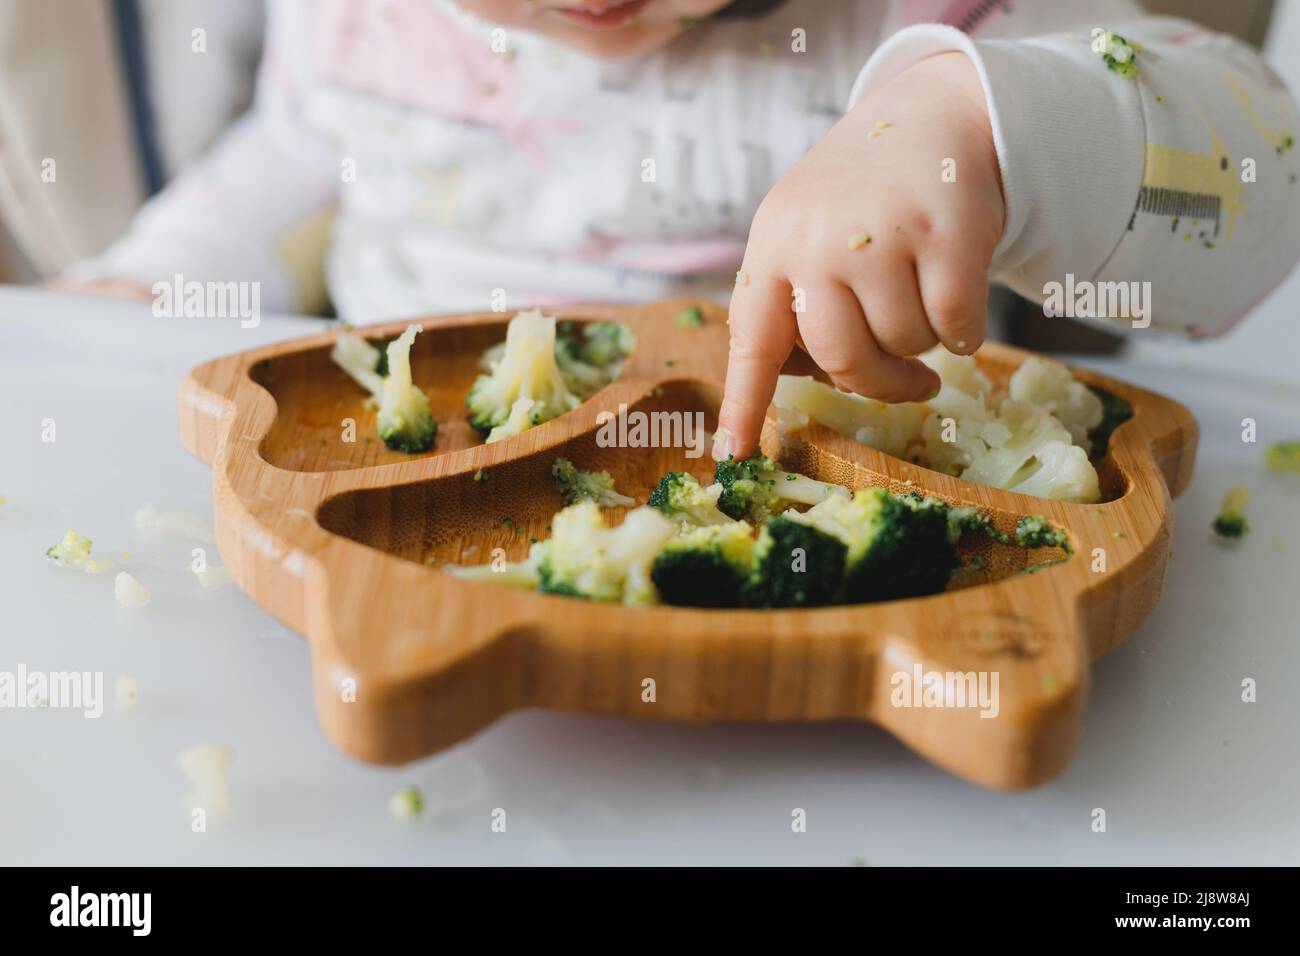 Soiled toddler eats boiled vegetables with his hands awkwardly while sitting on feeding chair Stock Photo